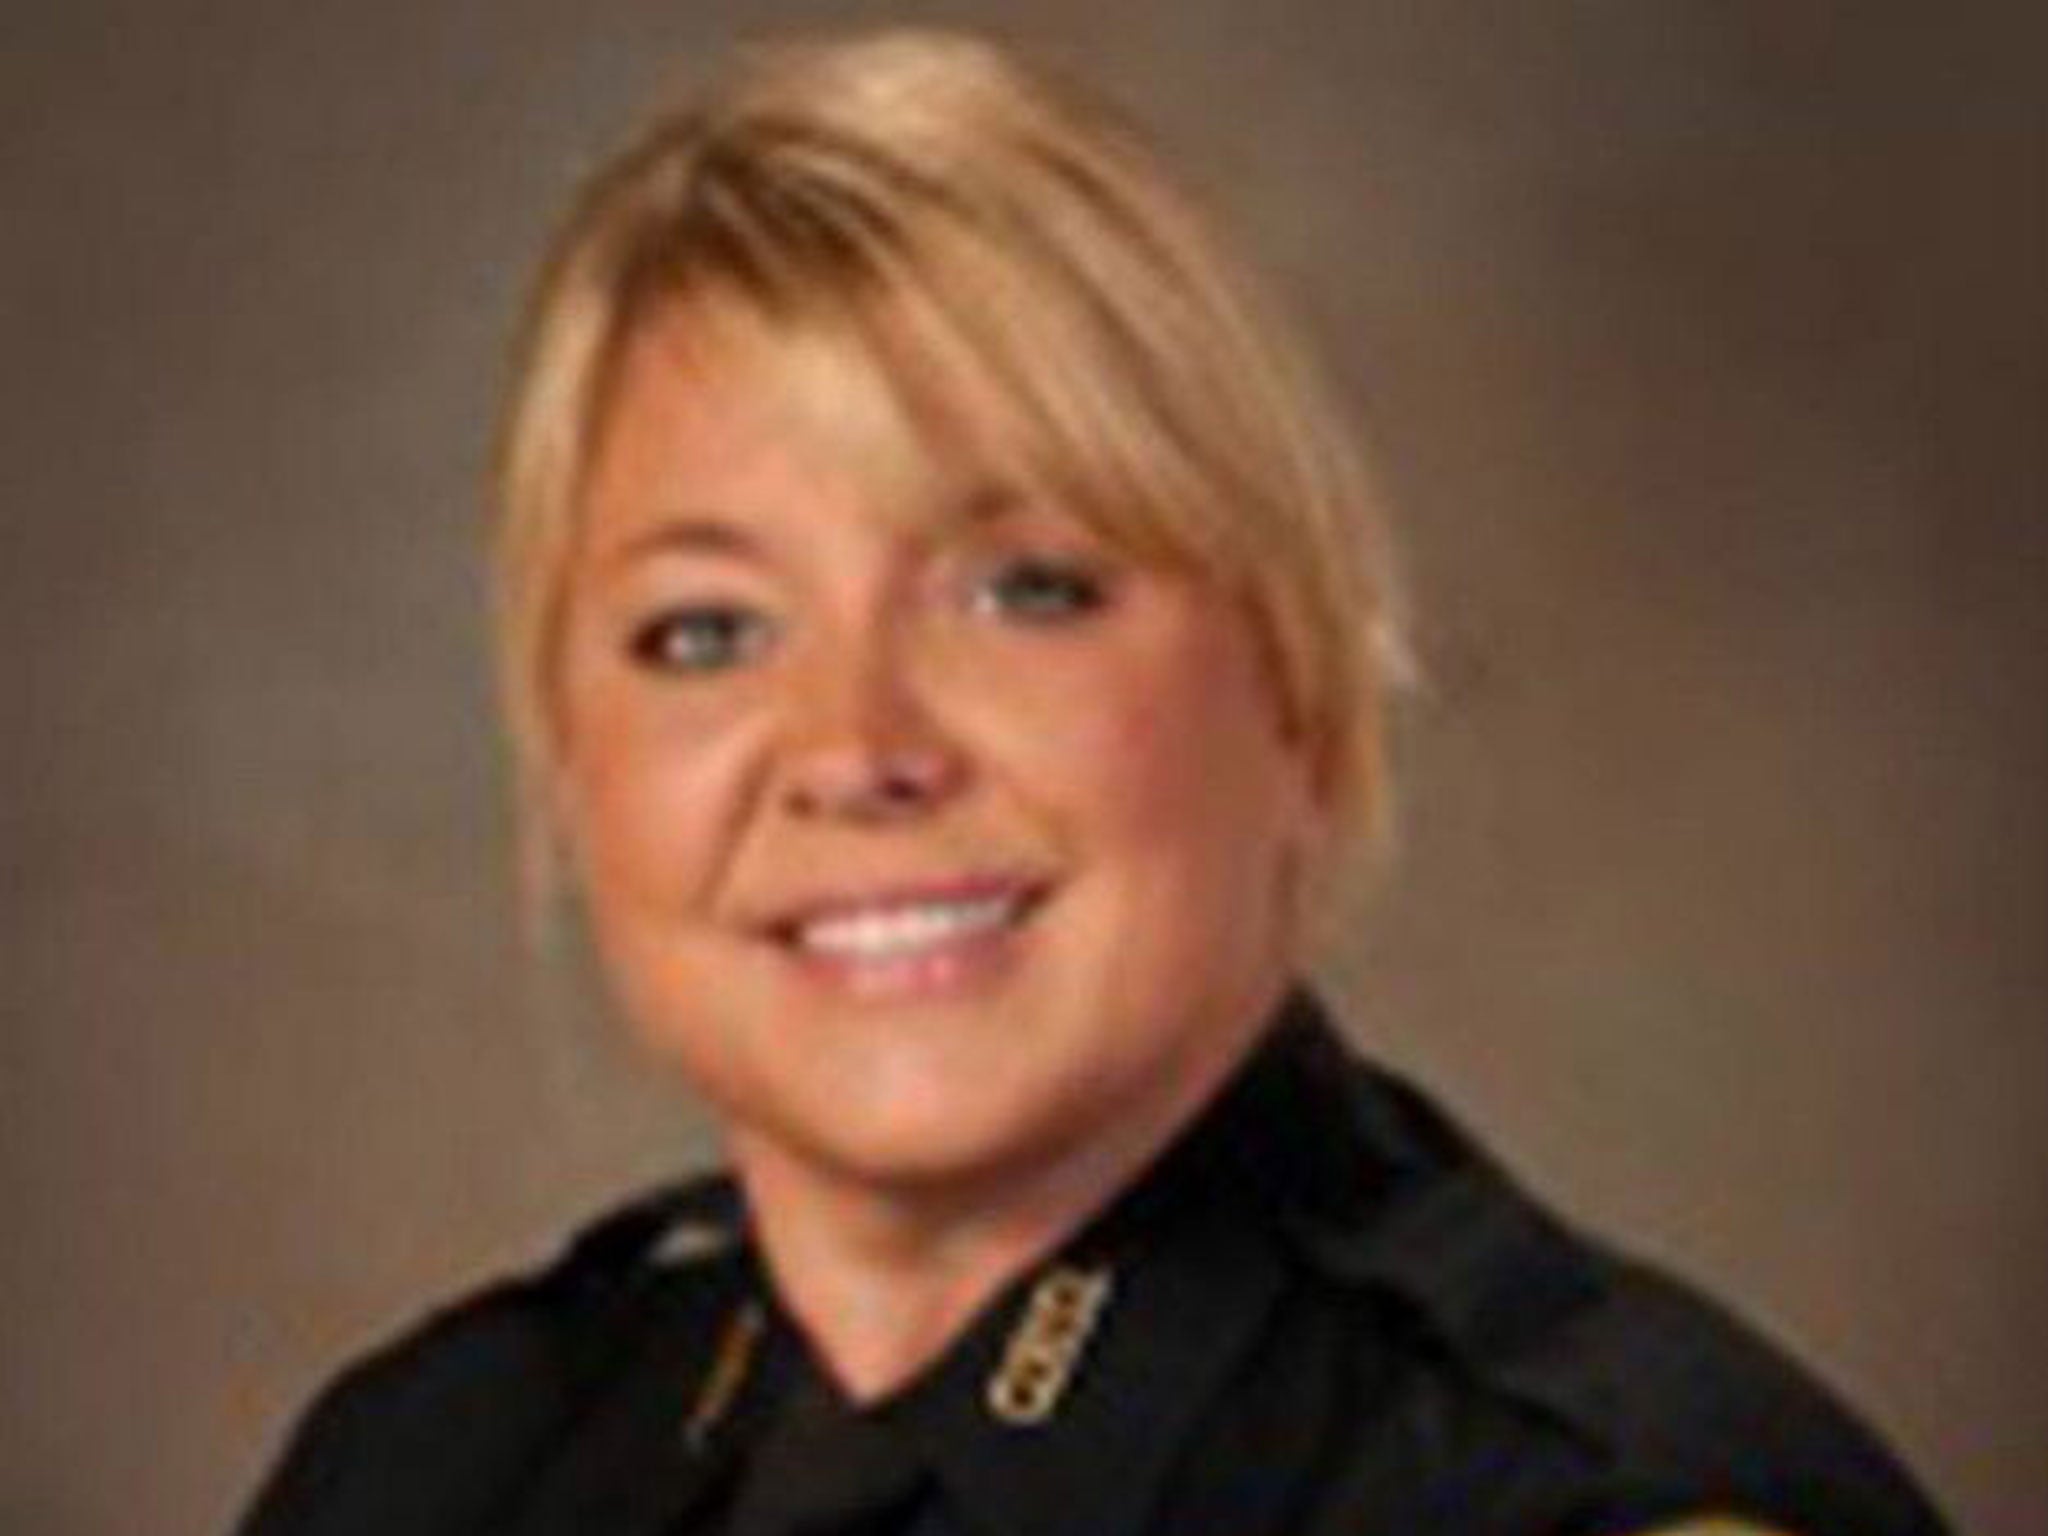 Sgt Erica Hay was pictured sitting down and sharing a meal with a homeless person